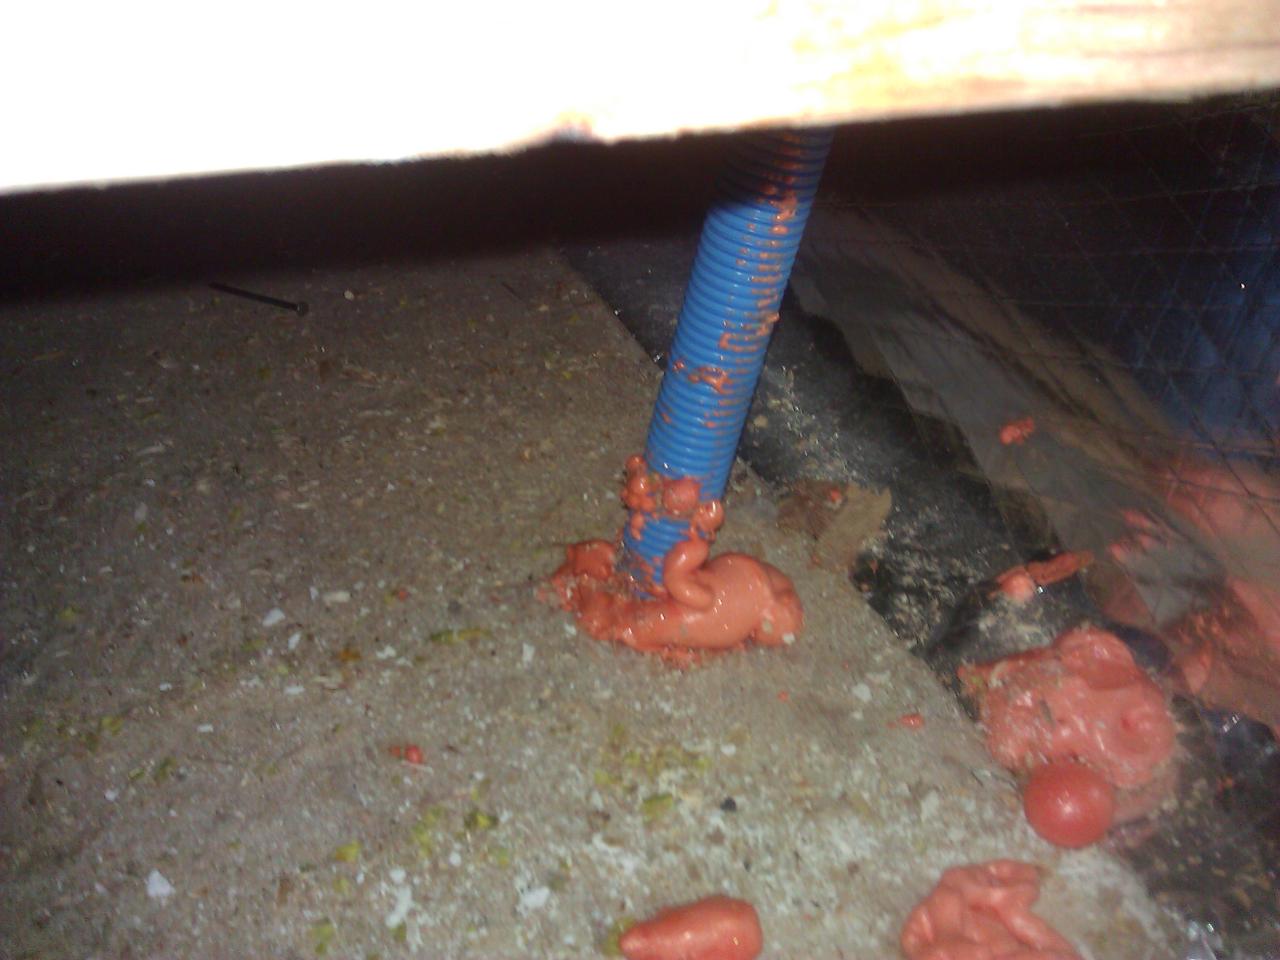 Filling the gap around the conduit with intumescent foam. Spilled a bunch.